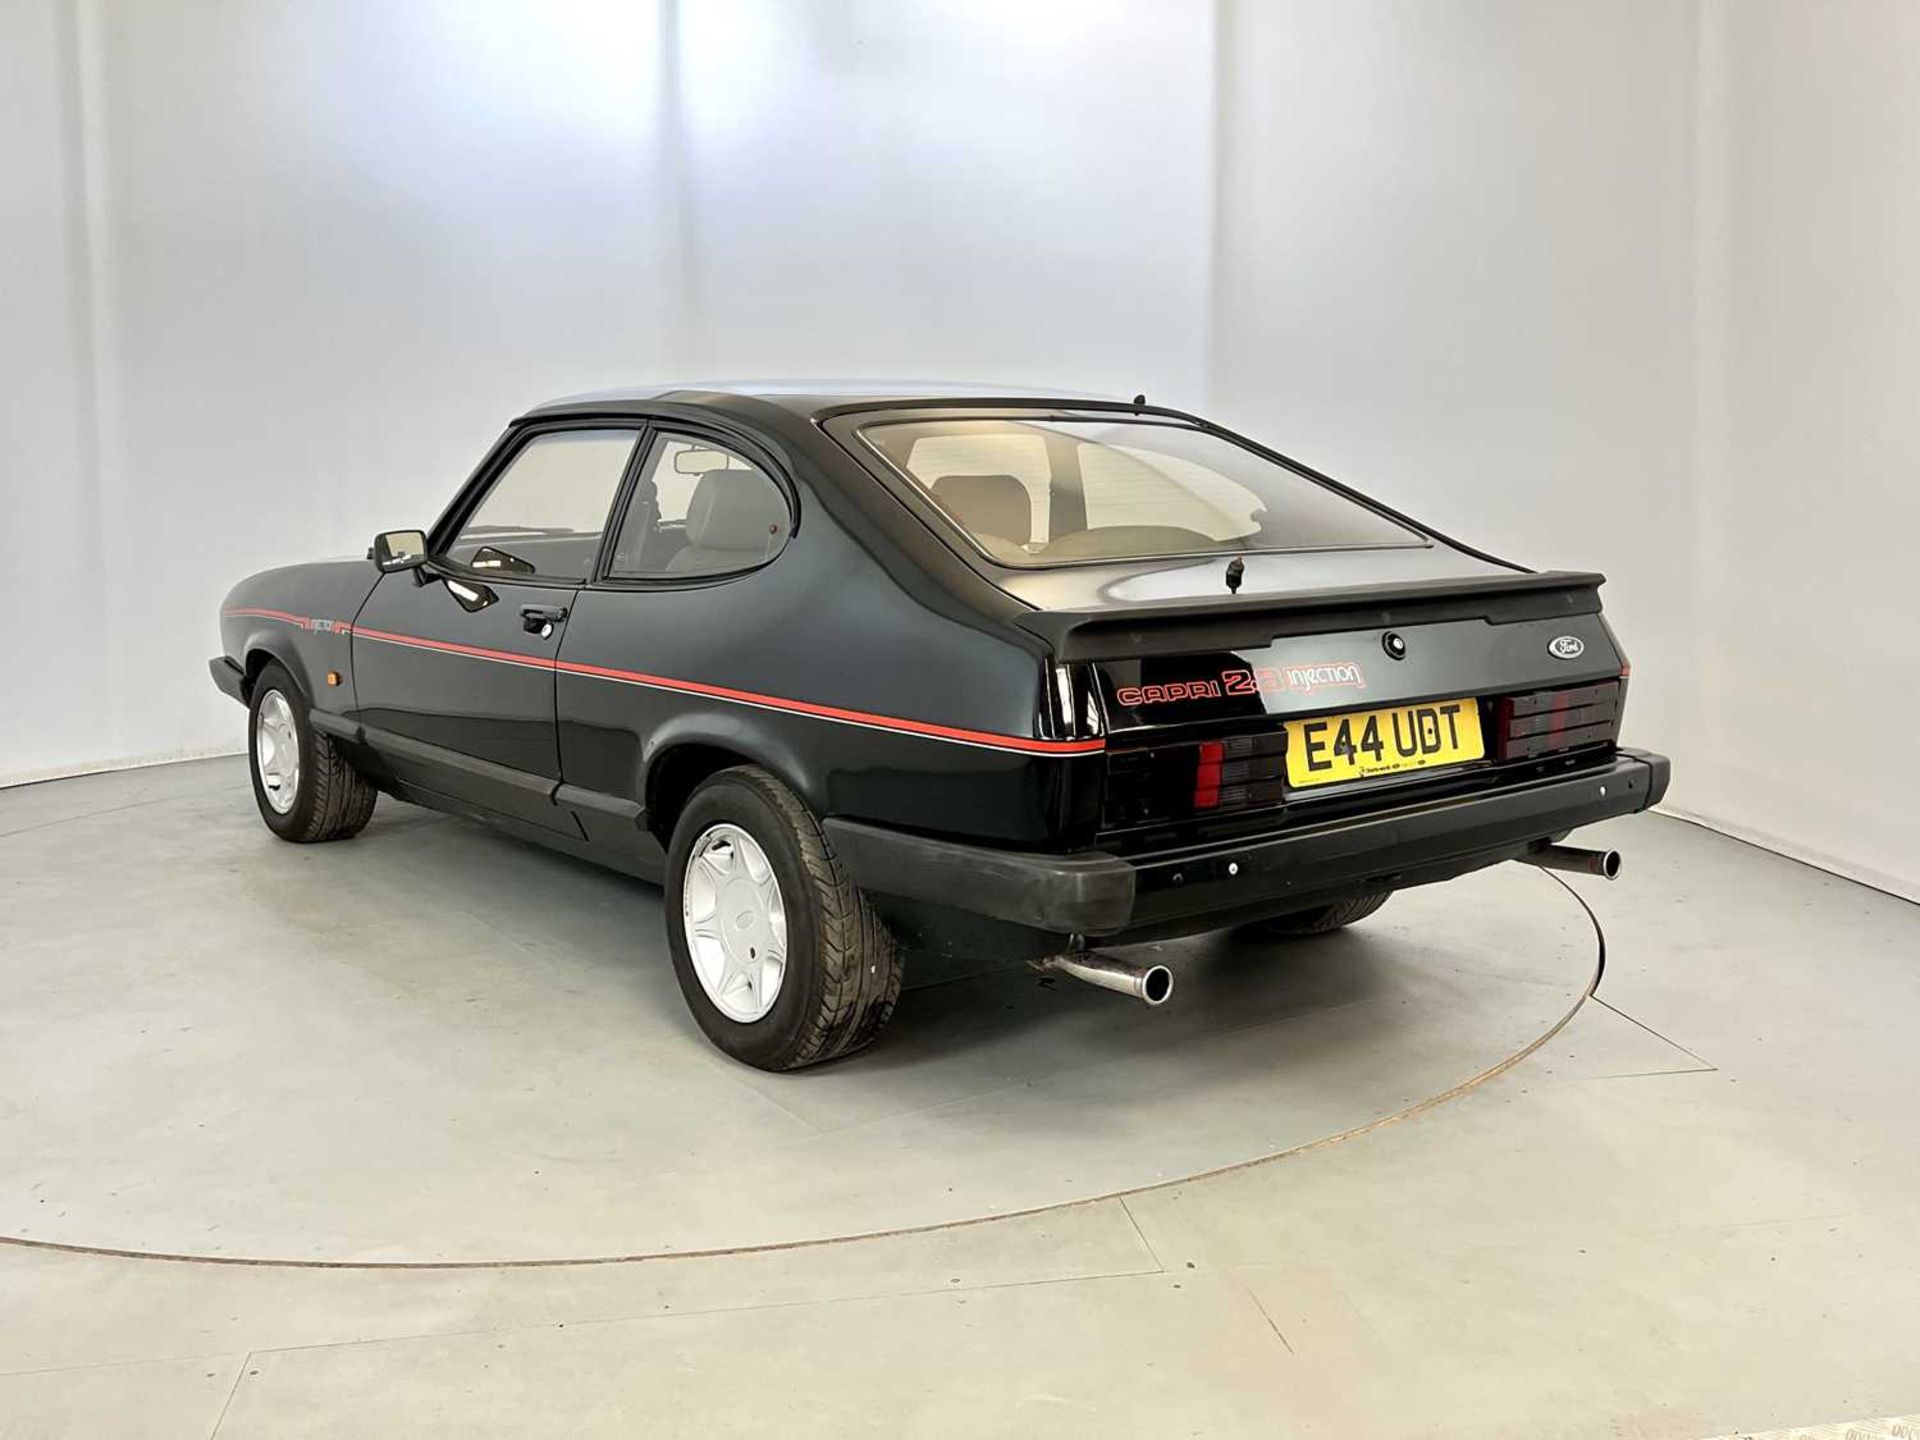 1987 Ford Capri 2.8 Injection - Image 7 of 28